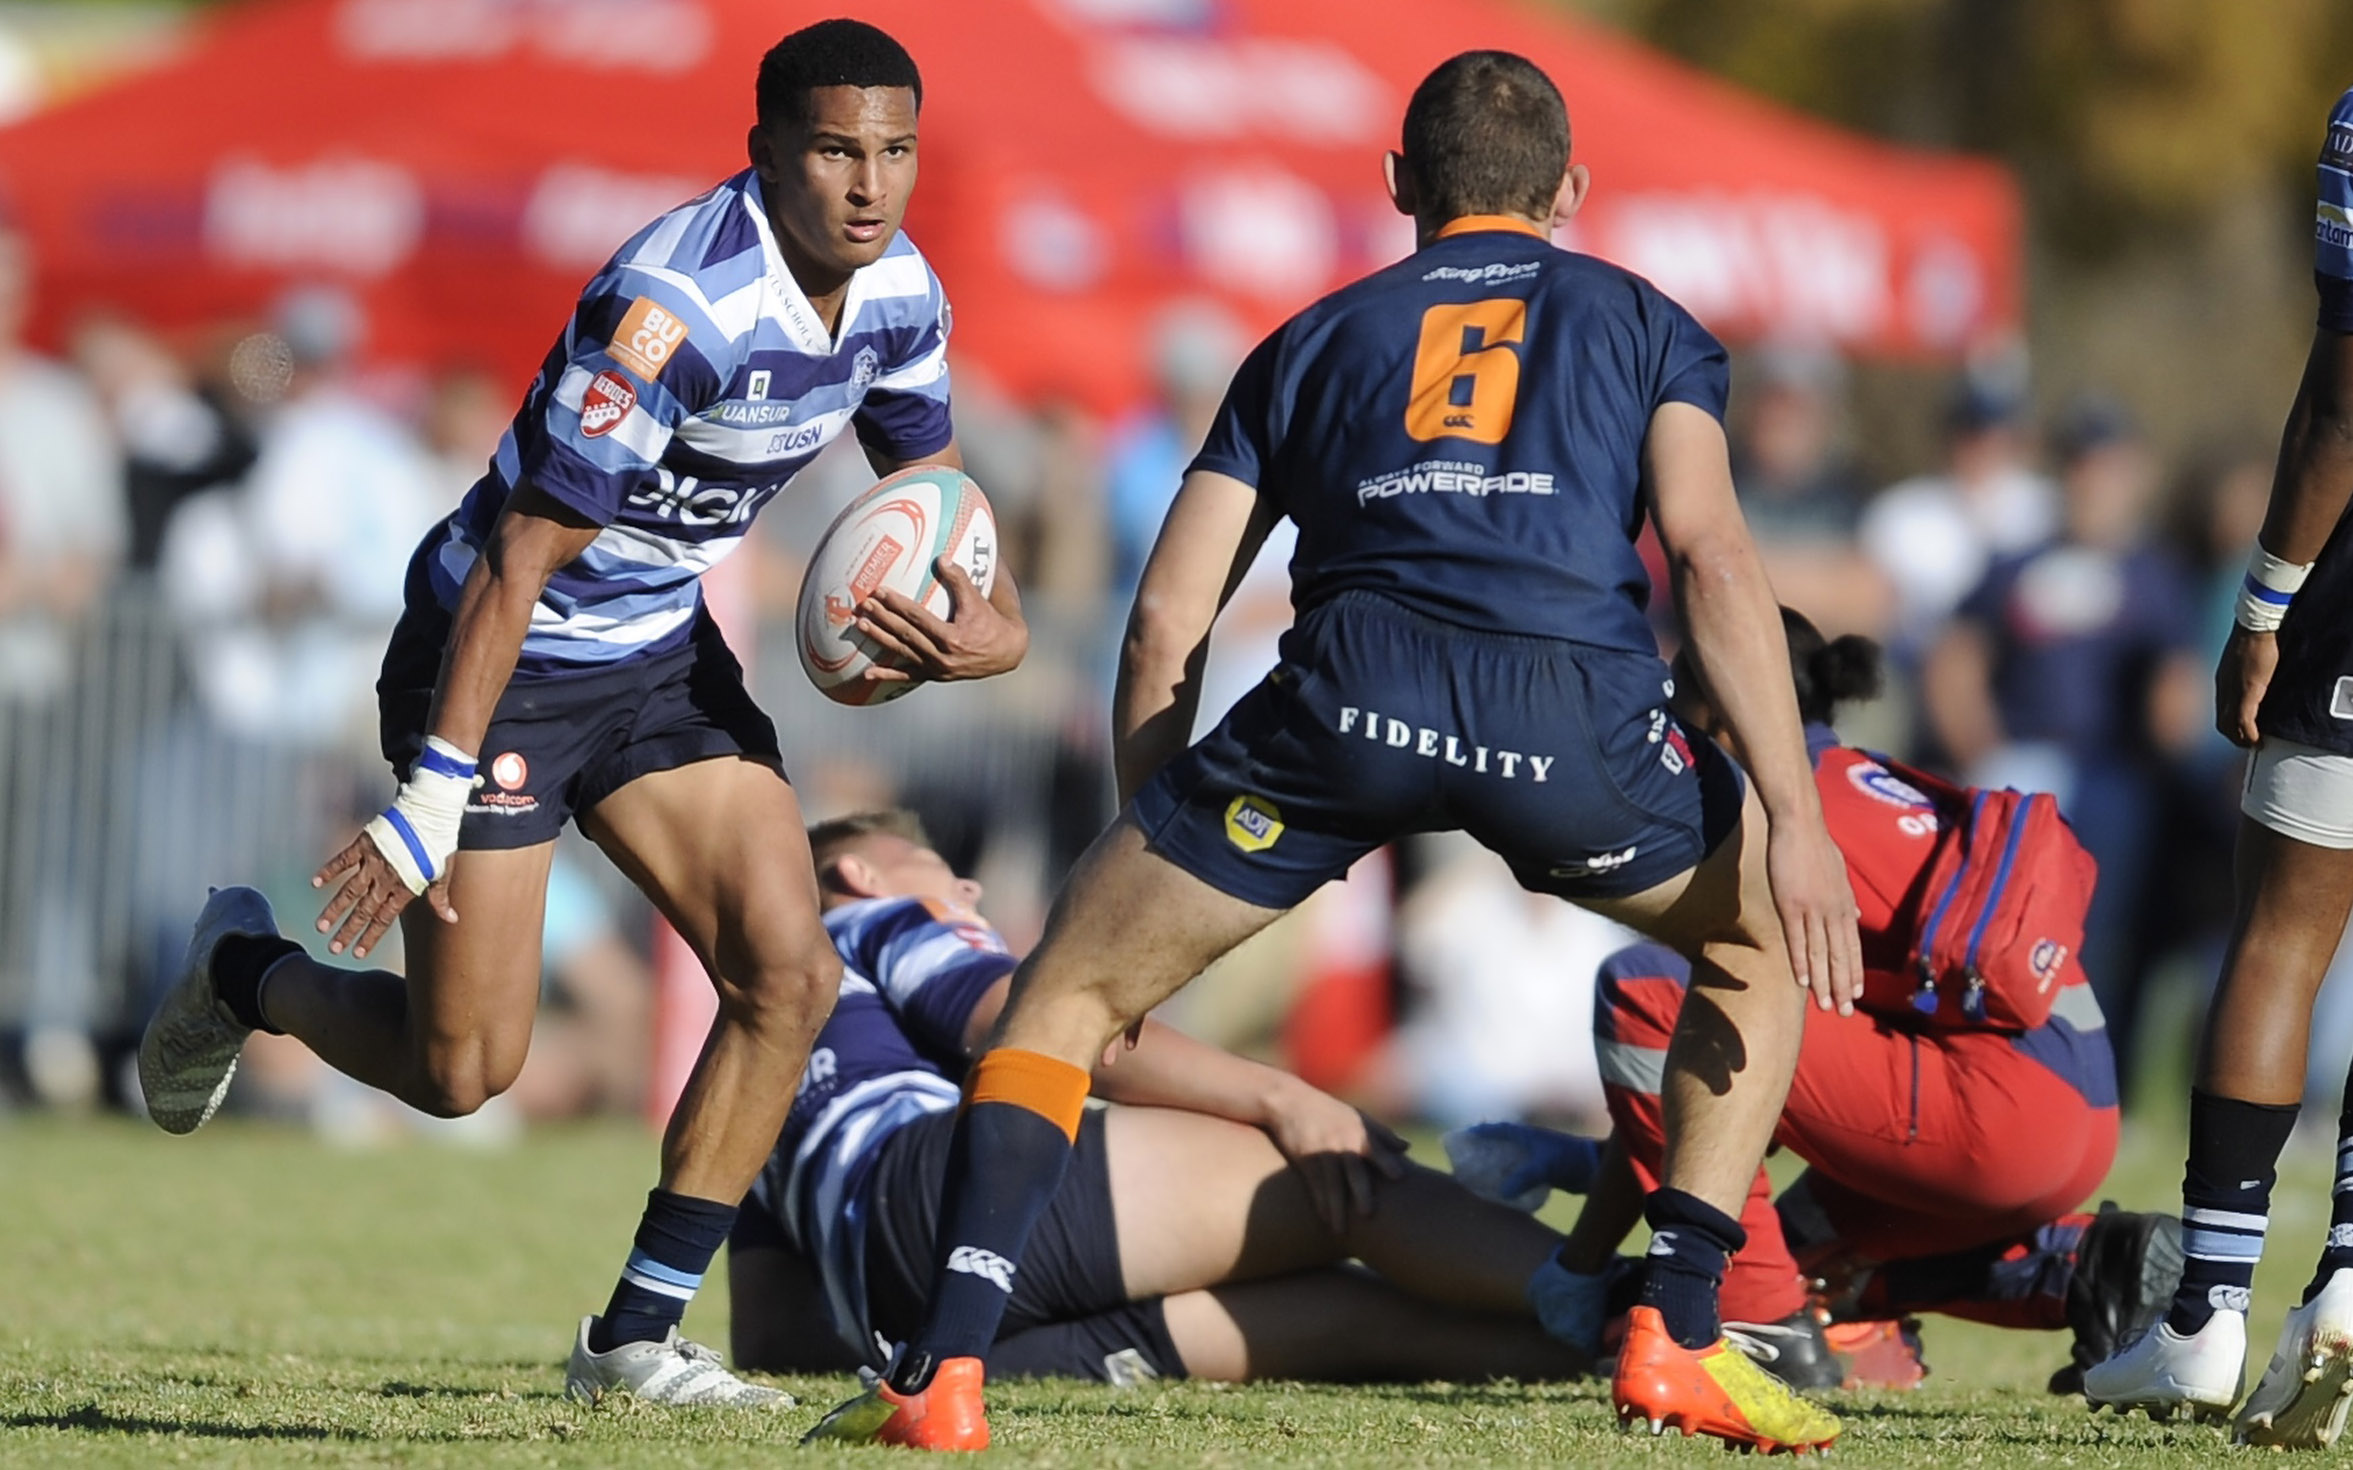 Shah Jehaan de Jongh of Paarl Boys High runs with the ball as Jean-Henri Smit of Grey College gets ready to tackle